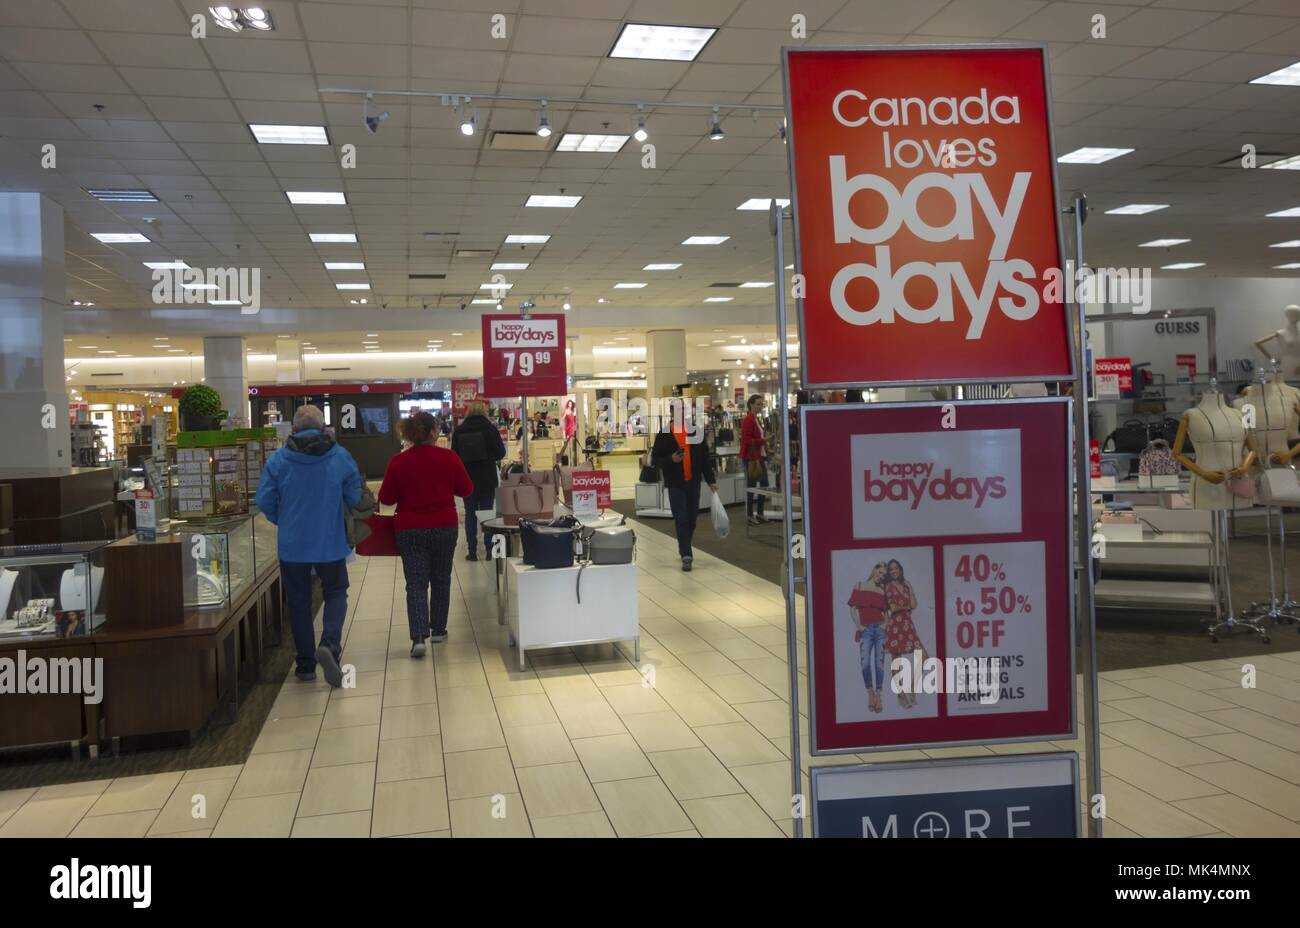 People walking in Hudson’s Bay Retail Store Interior during Bay Days Sale in Calgary, Alberta Market Mall shopping centre Stock Photo